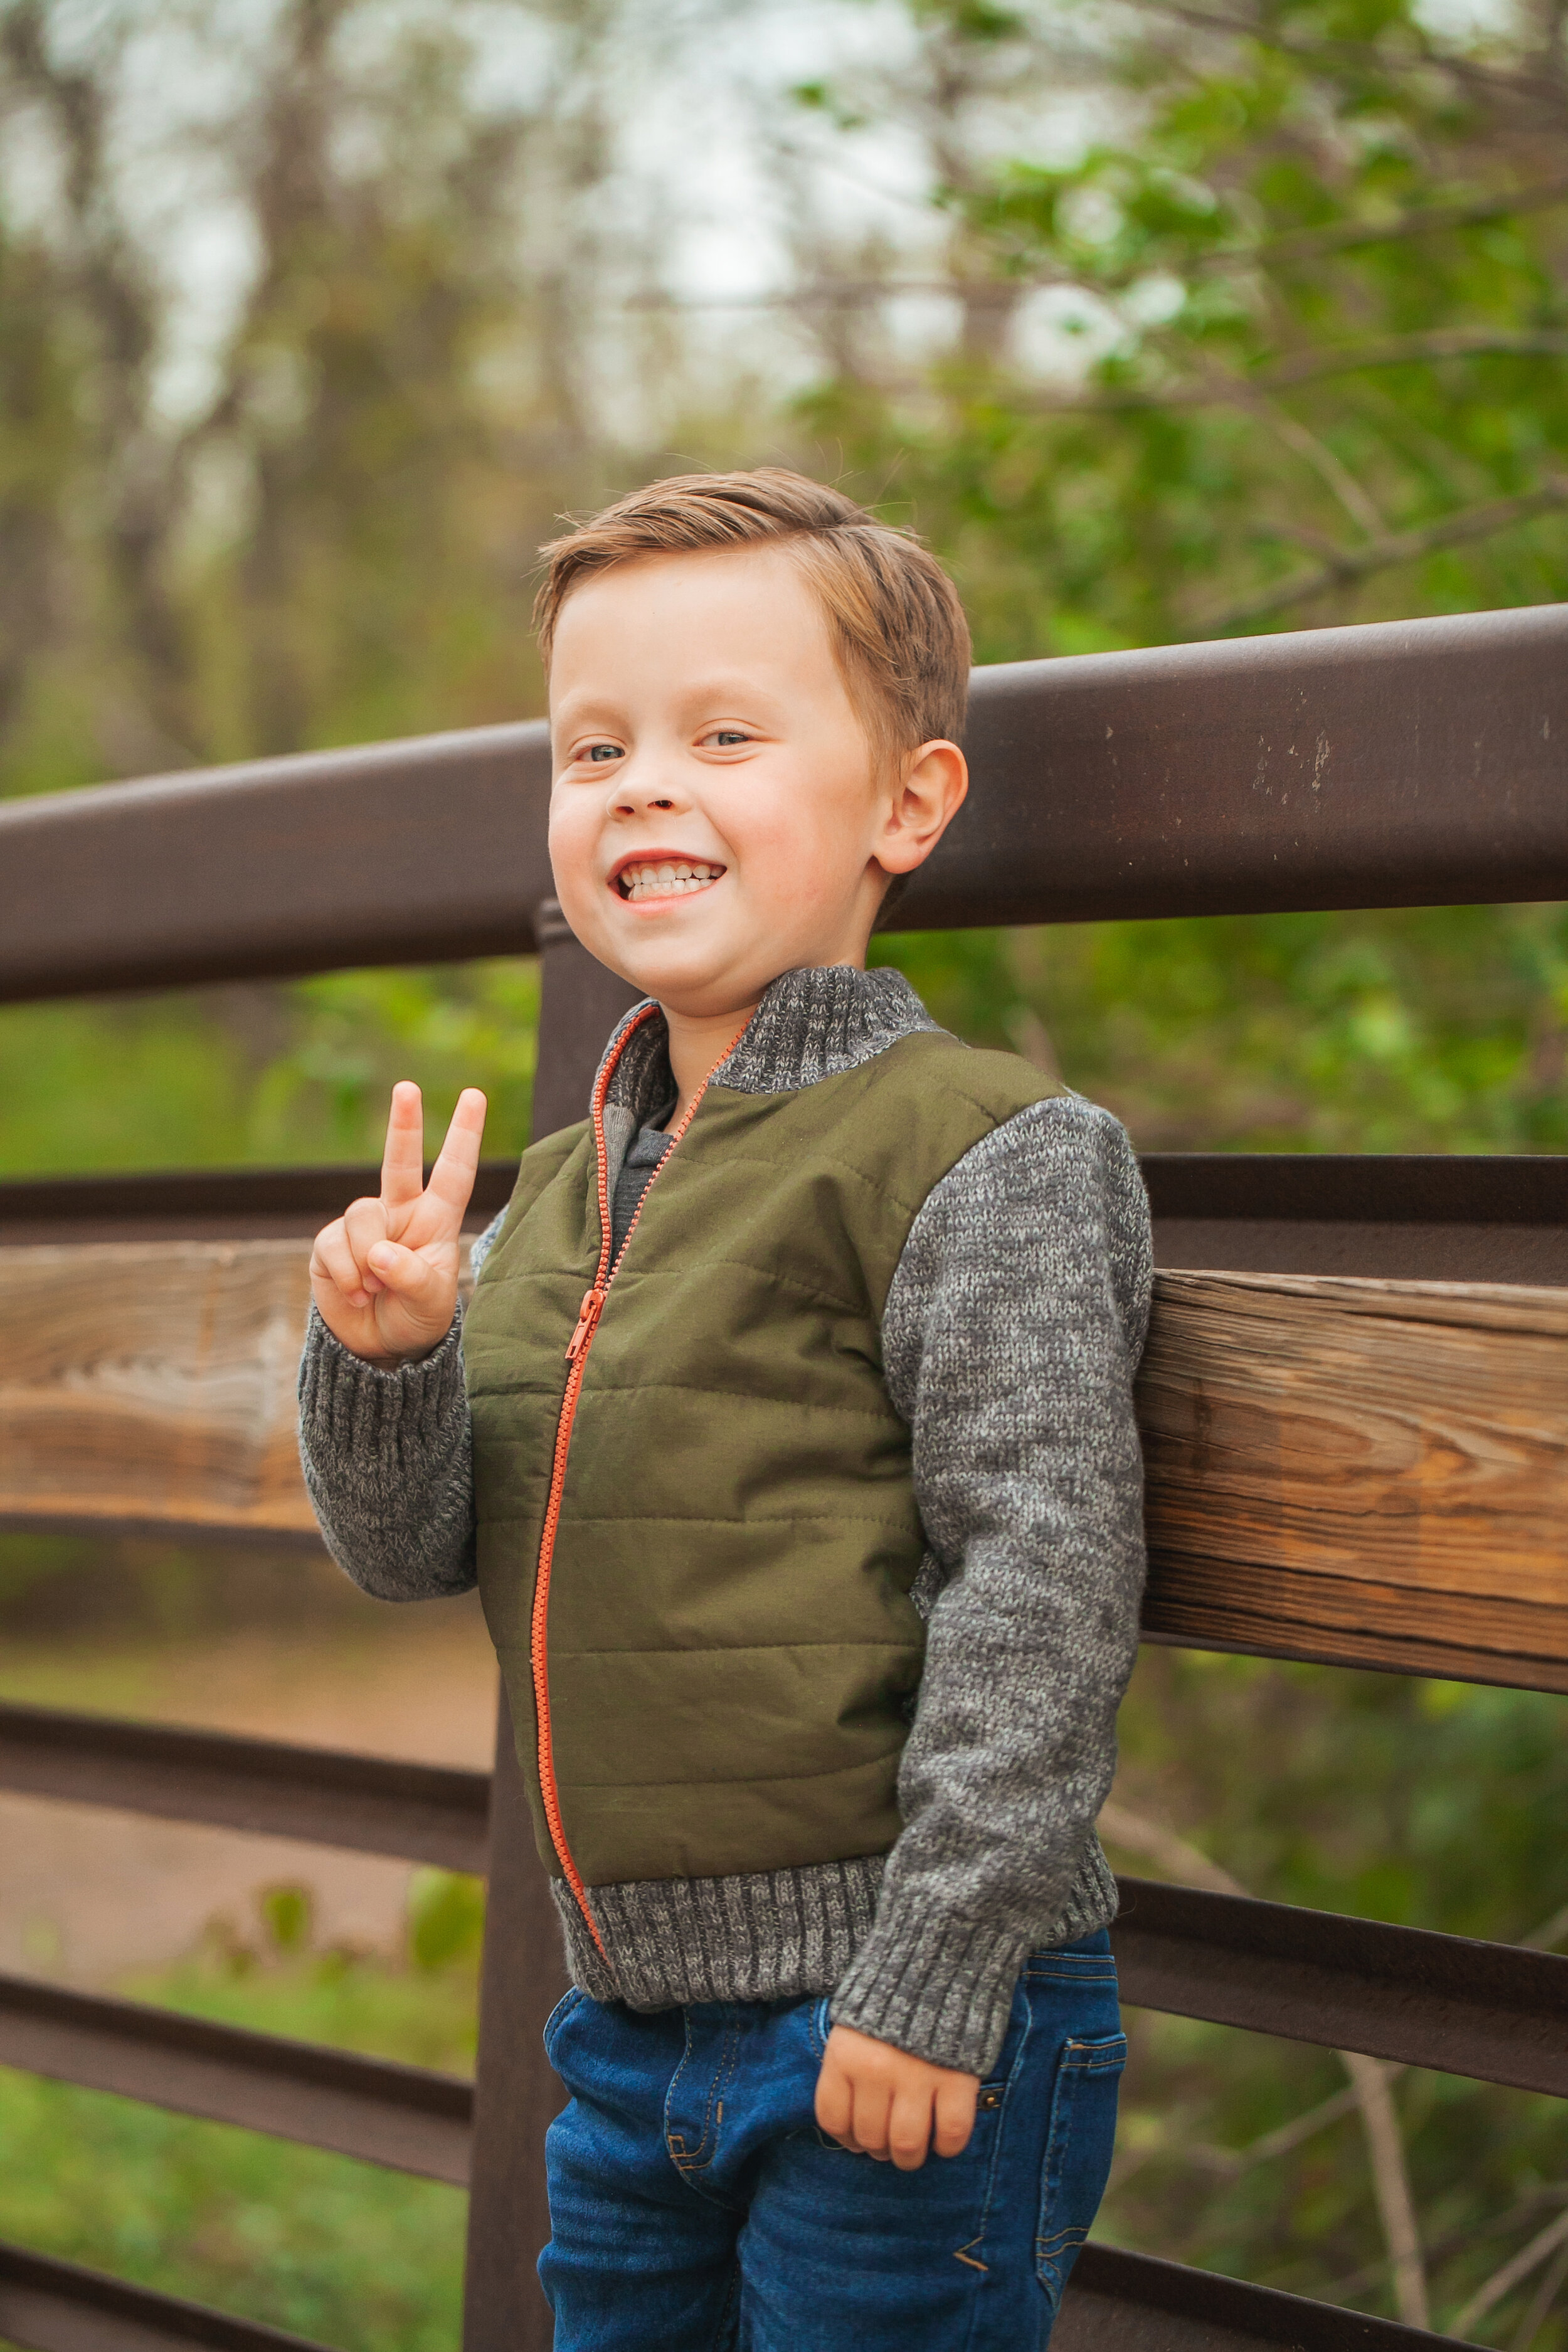 peace-sign-children's-portraits-with-personality-outdoor-family-children's-photographer-colleyville